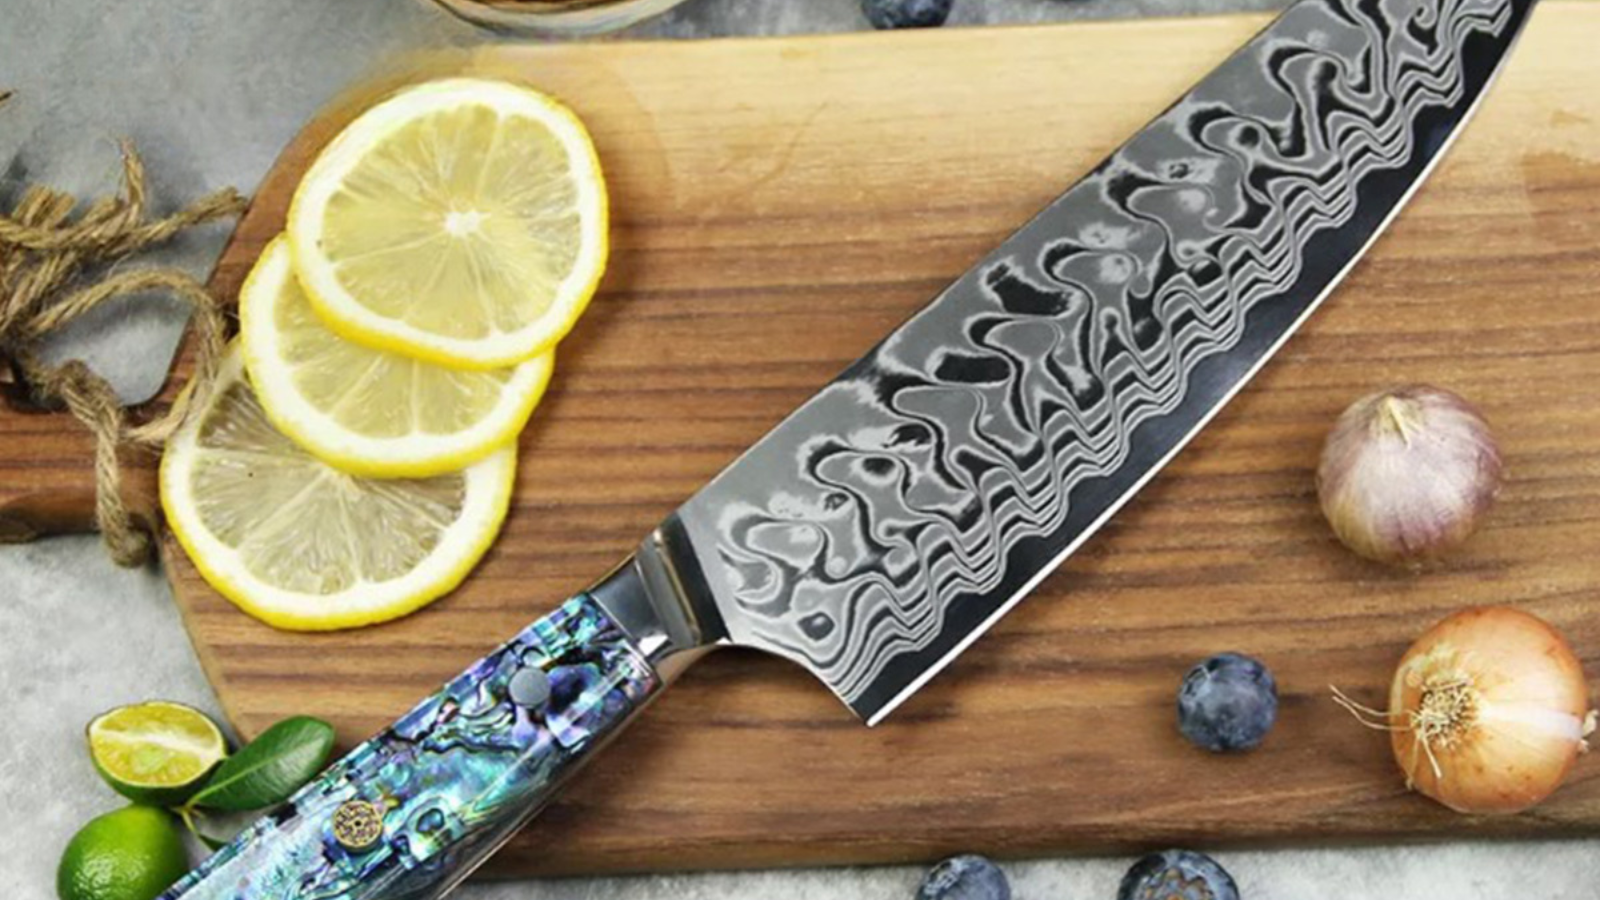 Ryori chef knife laying on cutting board with fruits and vegetables